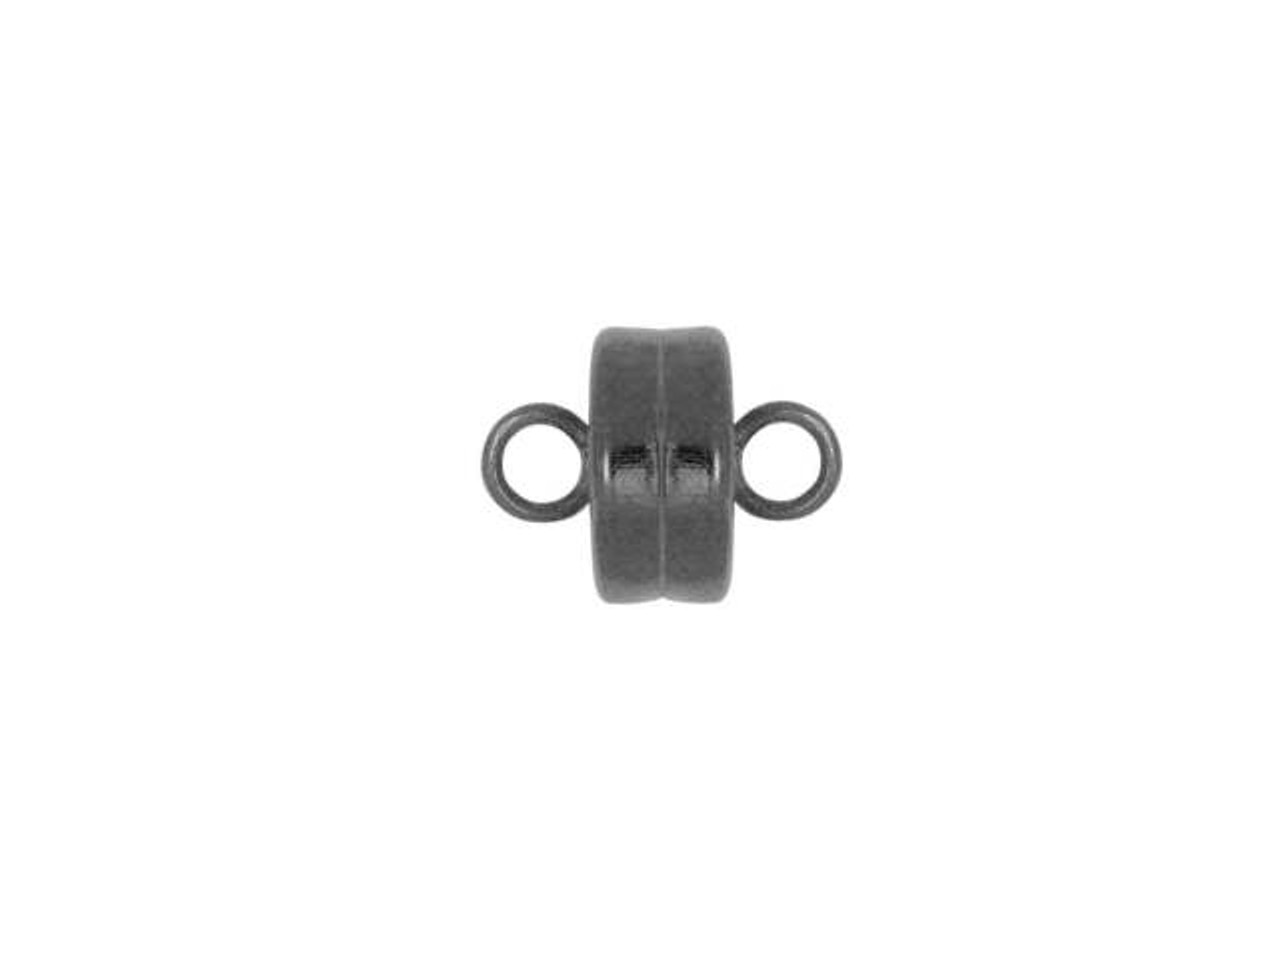 11mm MAG-LOK Magnetic Jewelry Clasp - Silver Plated - 1 set